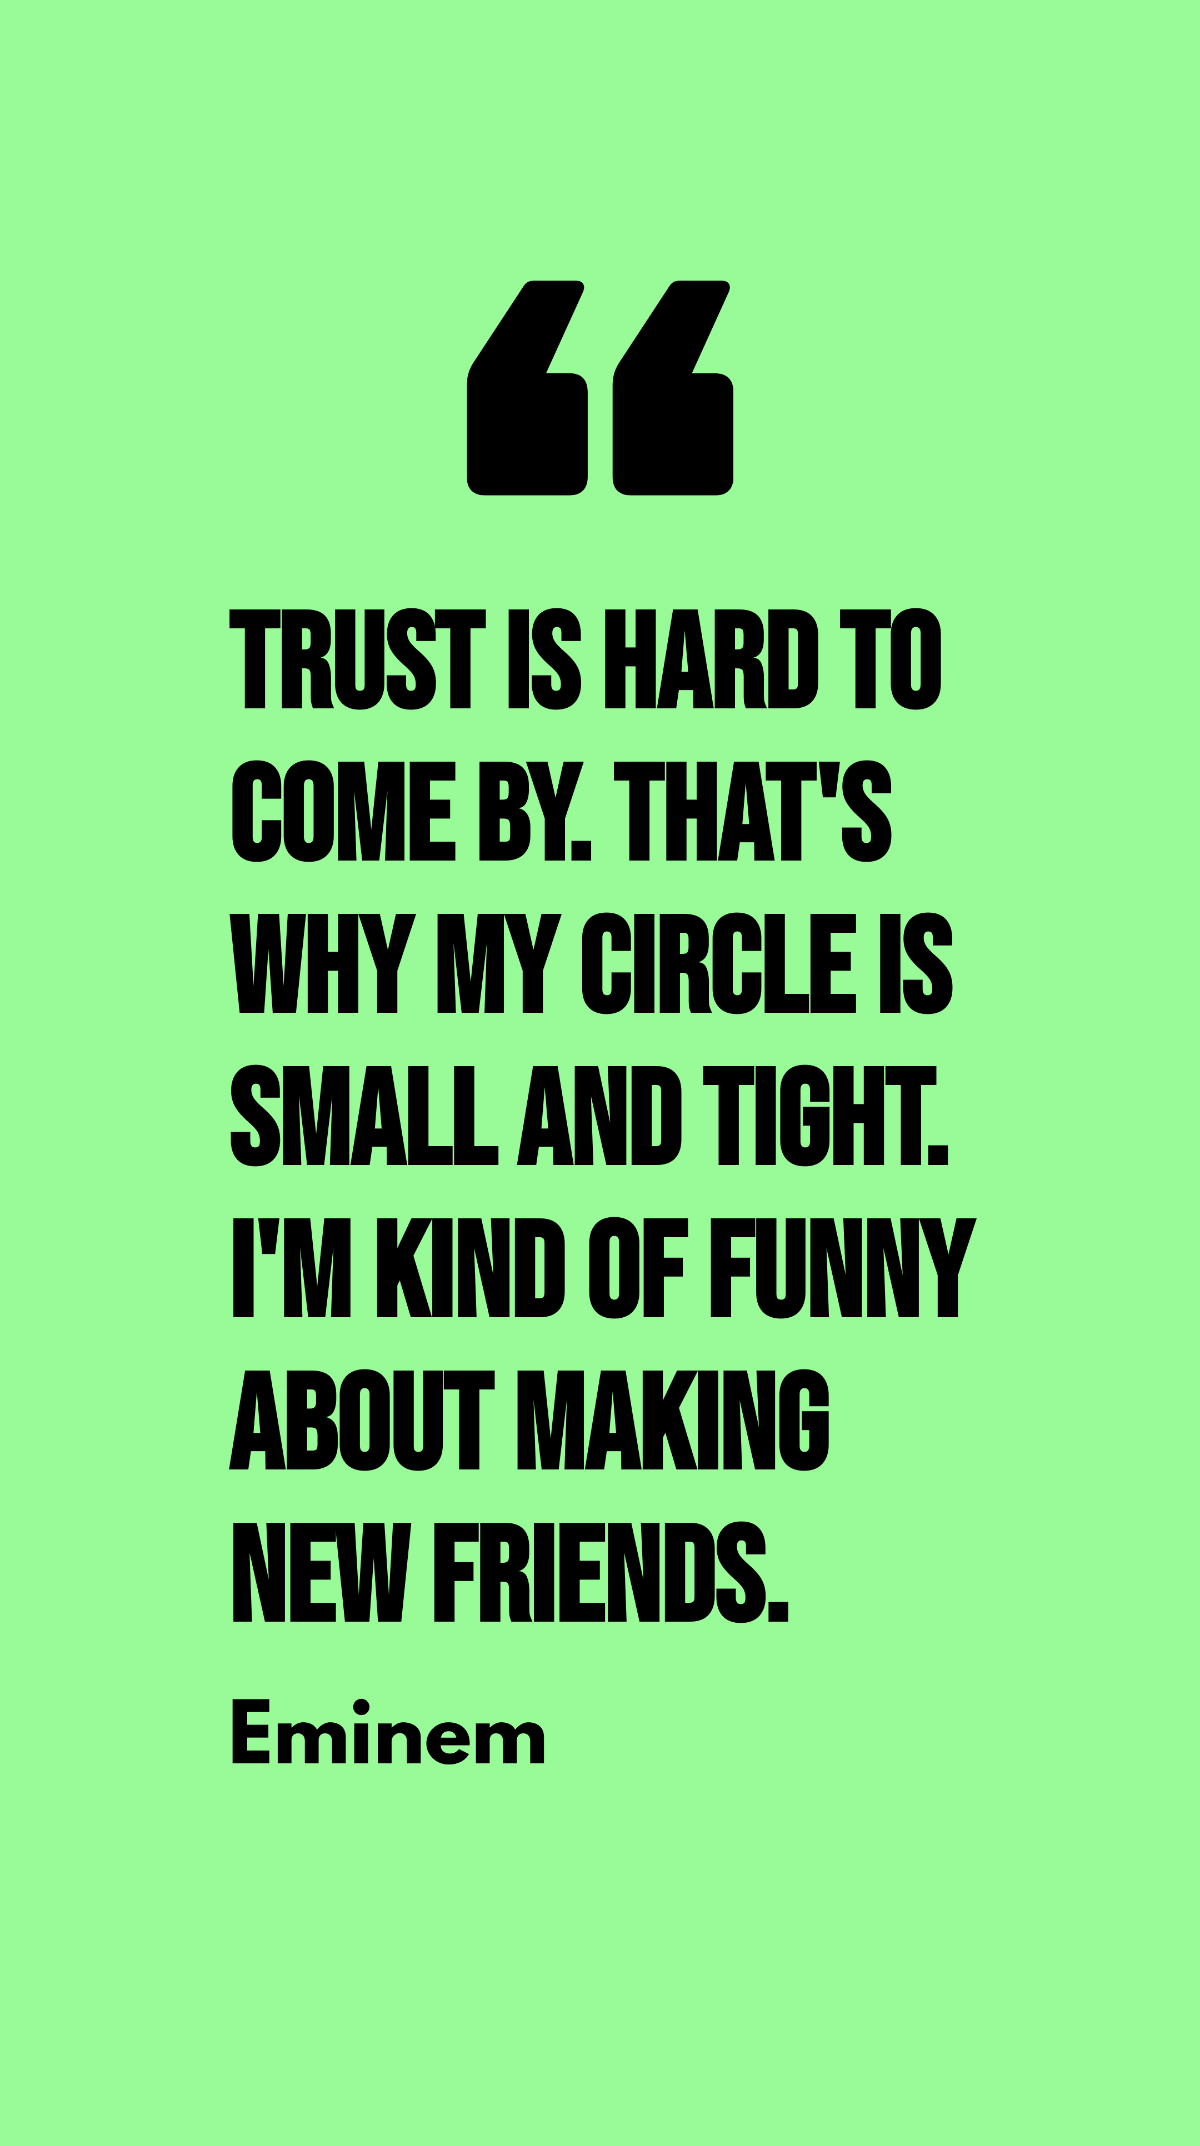 Eminem - Trust is hard to come by. That's why my circle is small and tight. I'm kind of funny about making new friends. Template